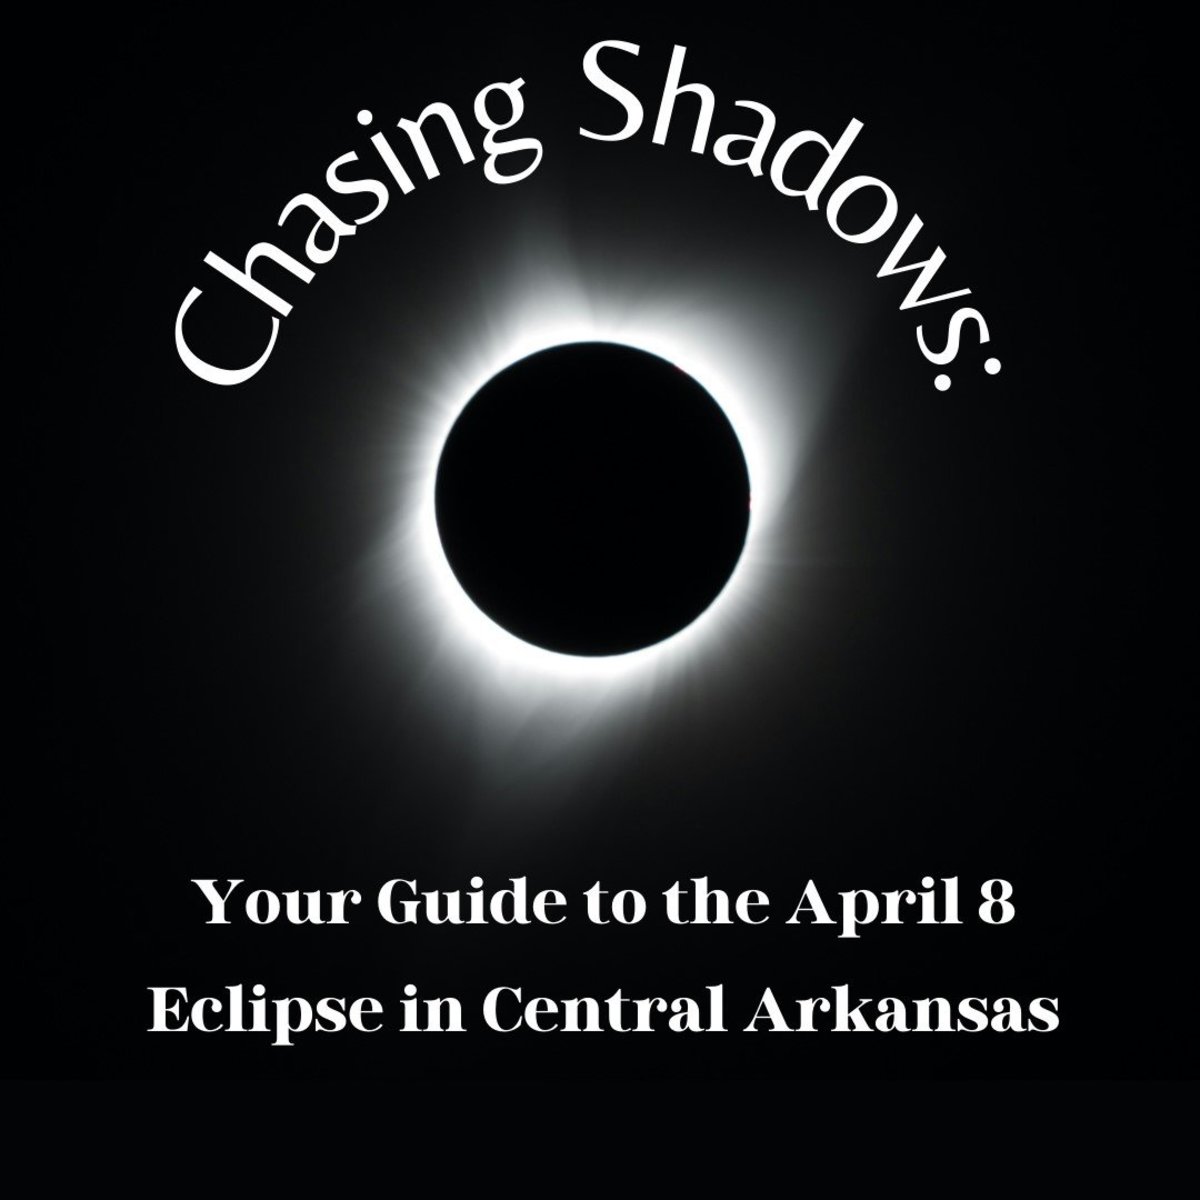 Chasing Shadows: Your Guide to the April 8 Eclipse in Central Arkansas!